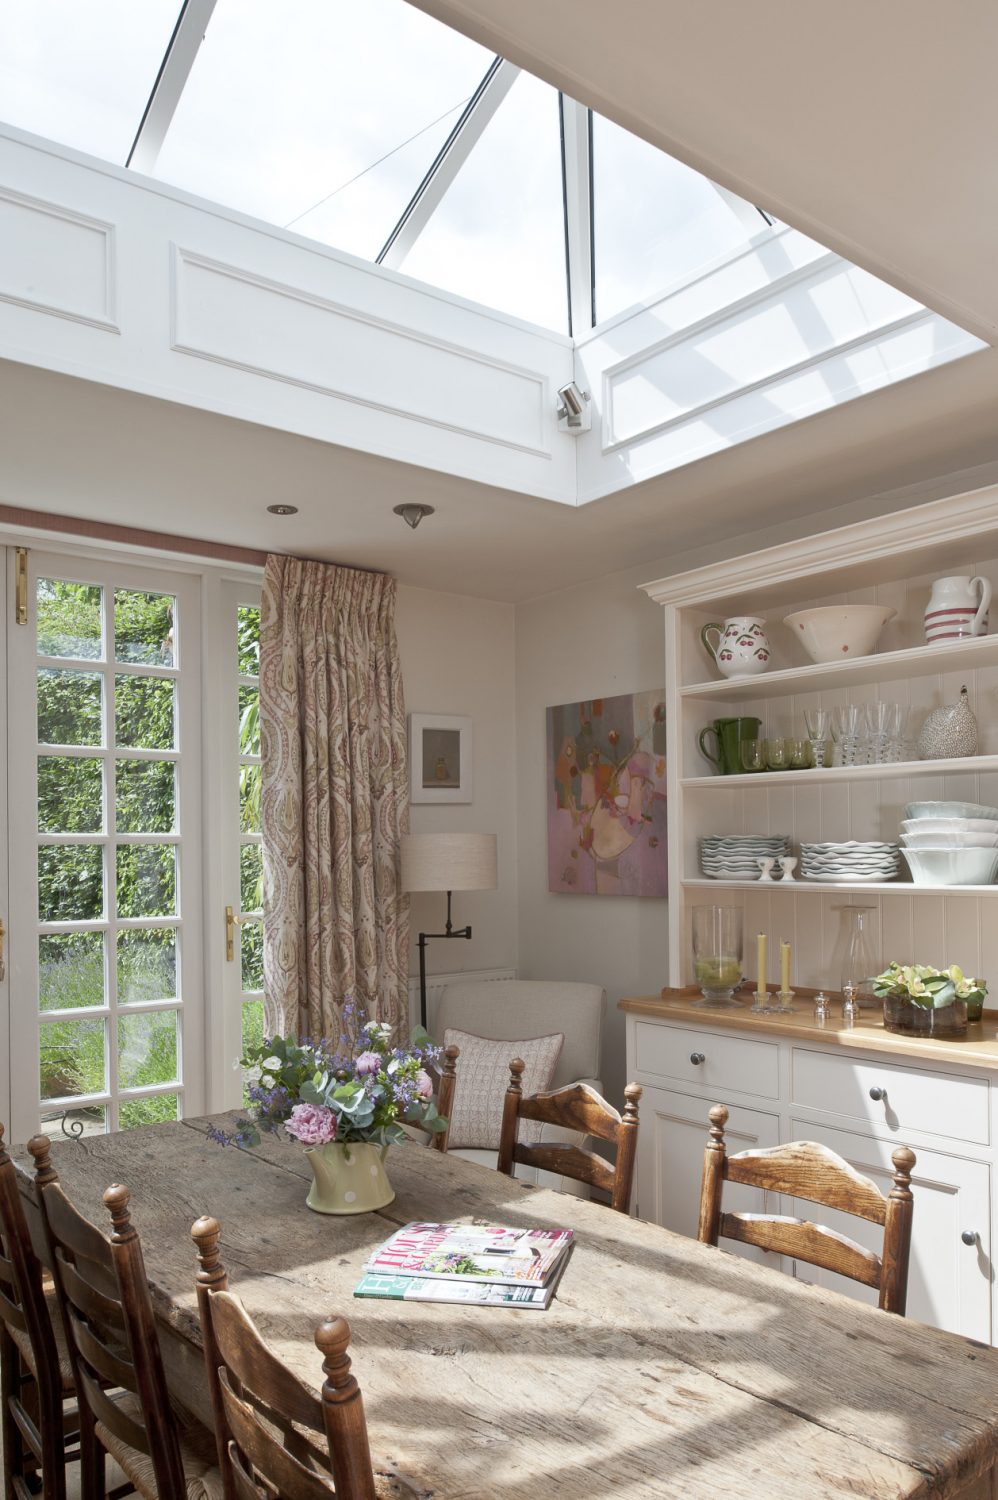 The kitchen table was destined for a home in Corfu but now resides in an ideal spot in Kent